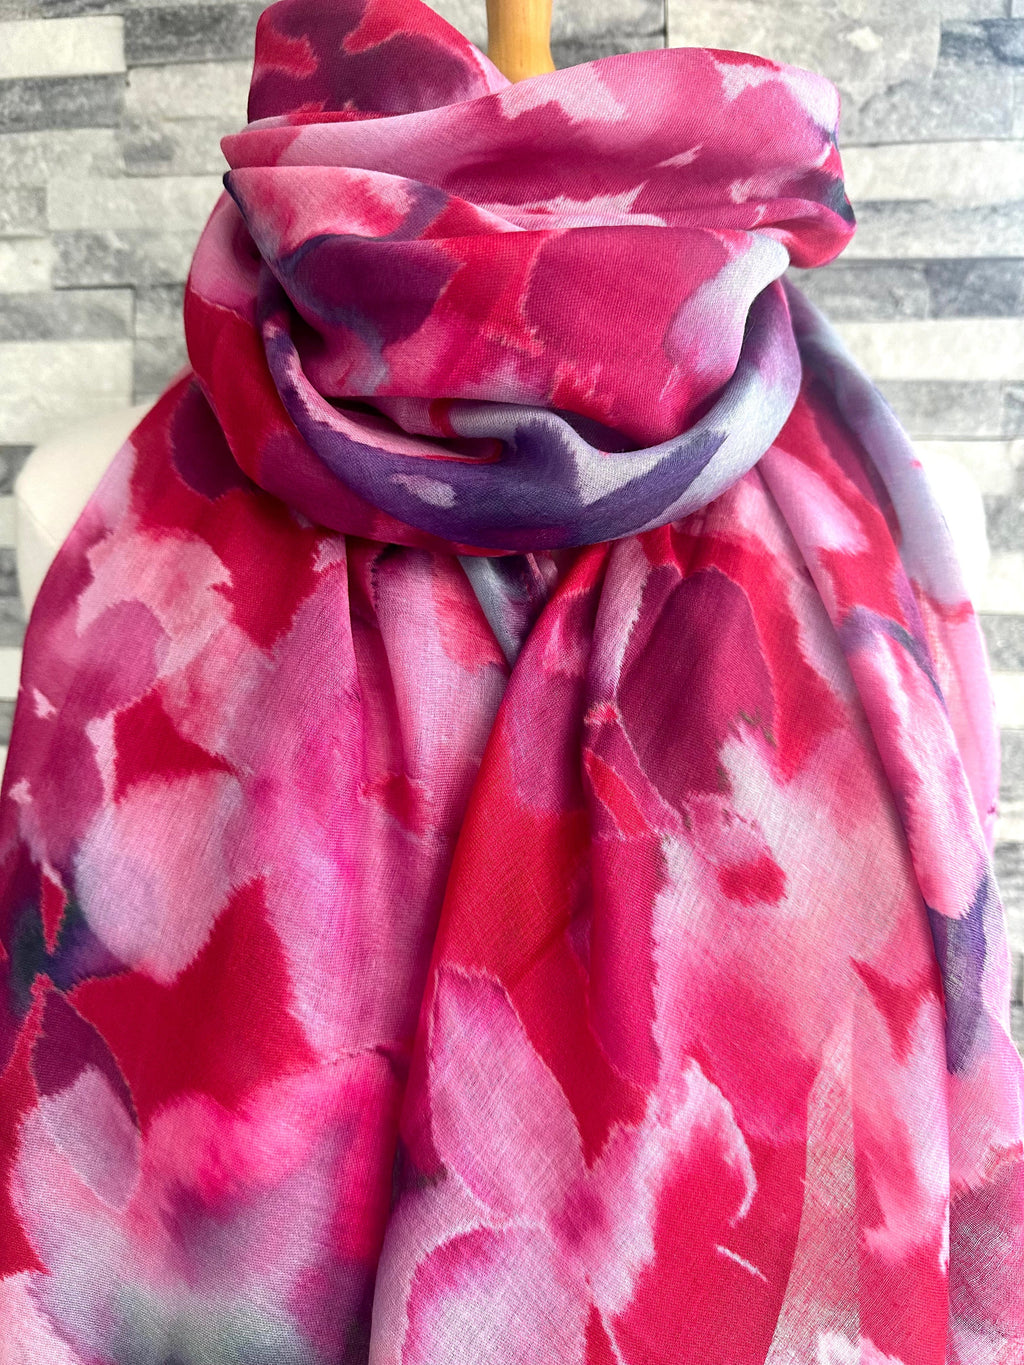 lusciousscarves Ladies Water coloured Floral Shapes Scarf, Red, Pink and Purple.